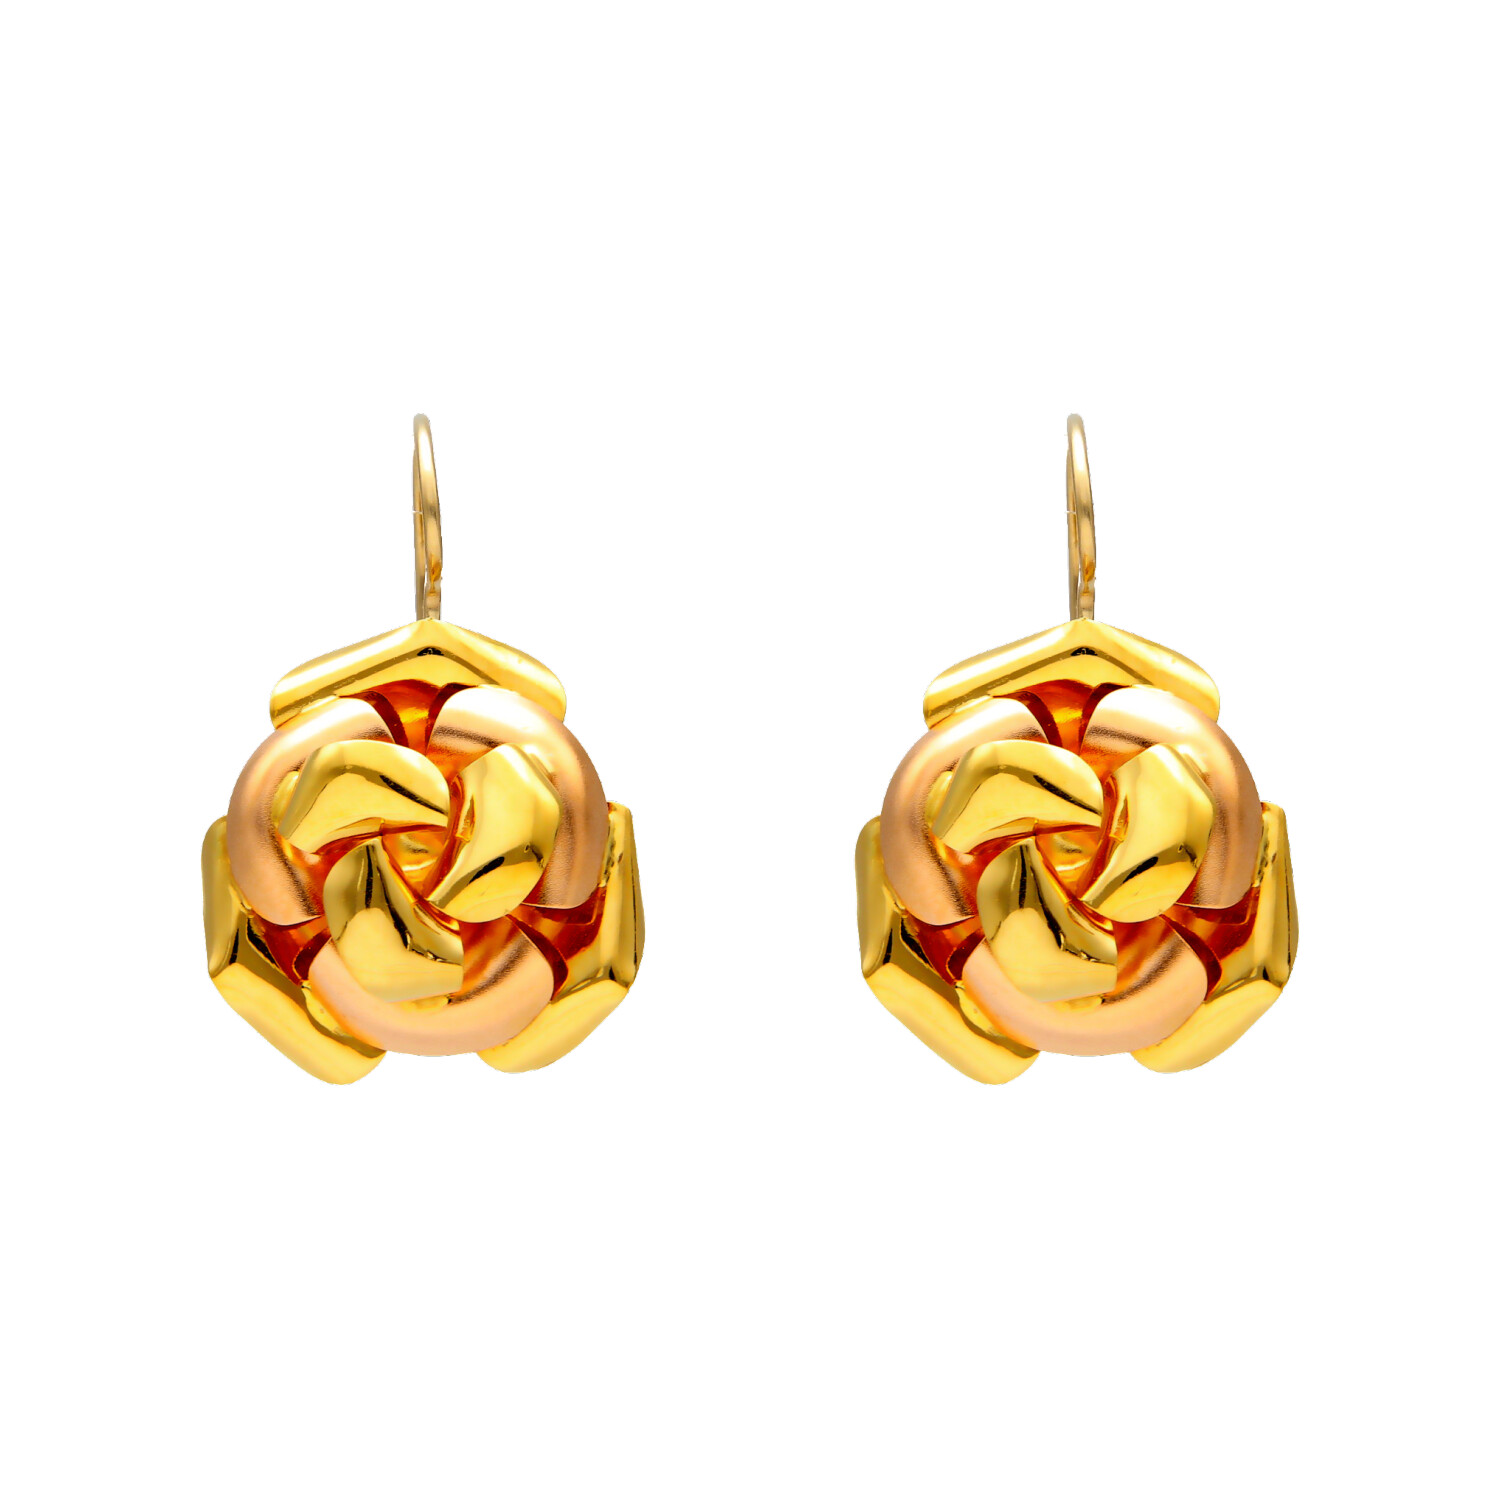 Rose earrings yellow and rose gold